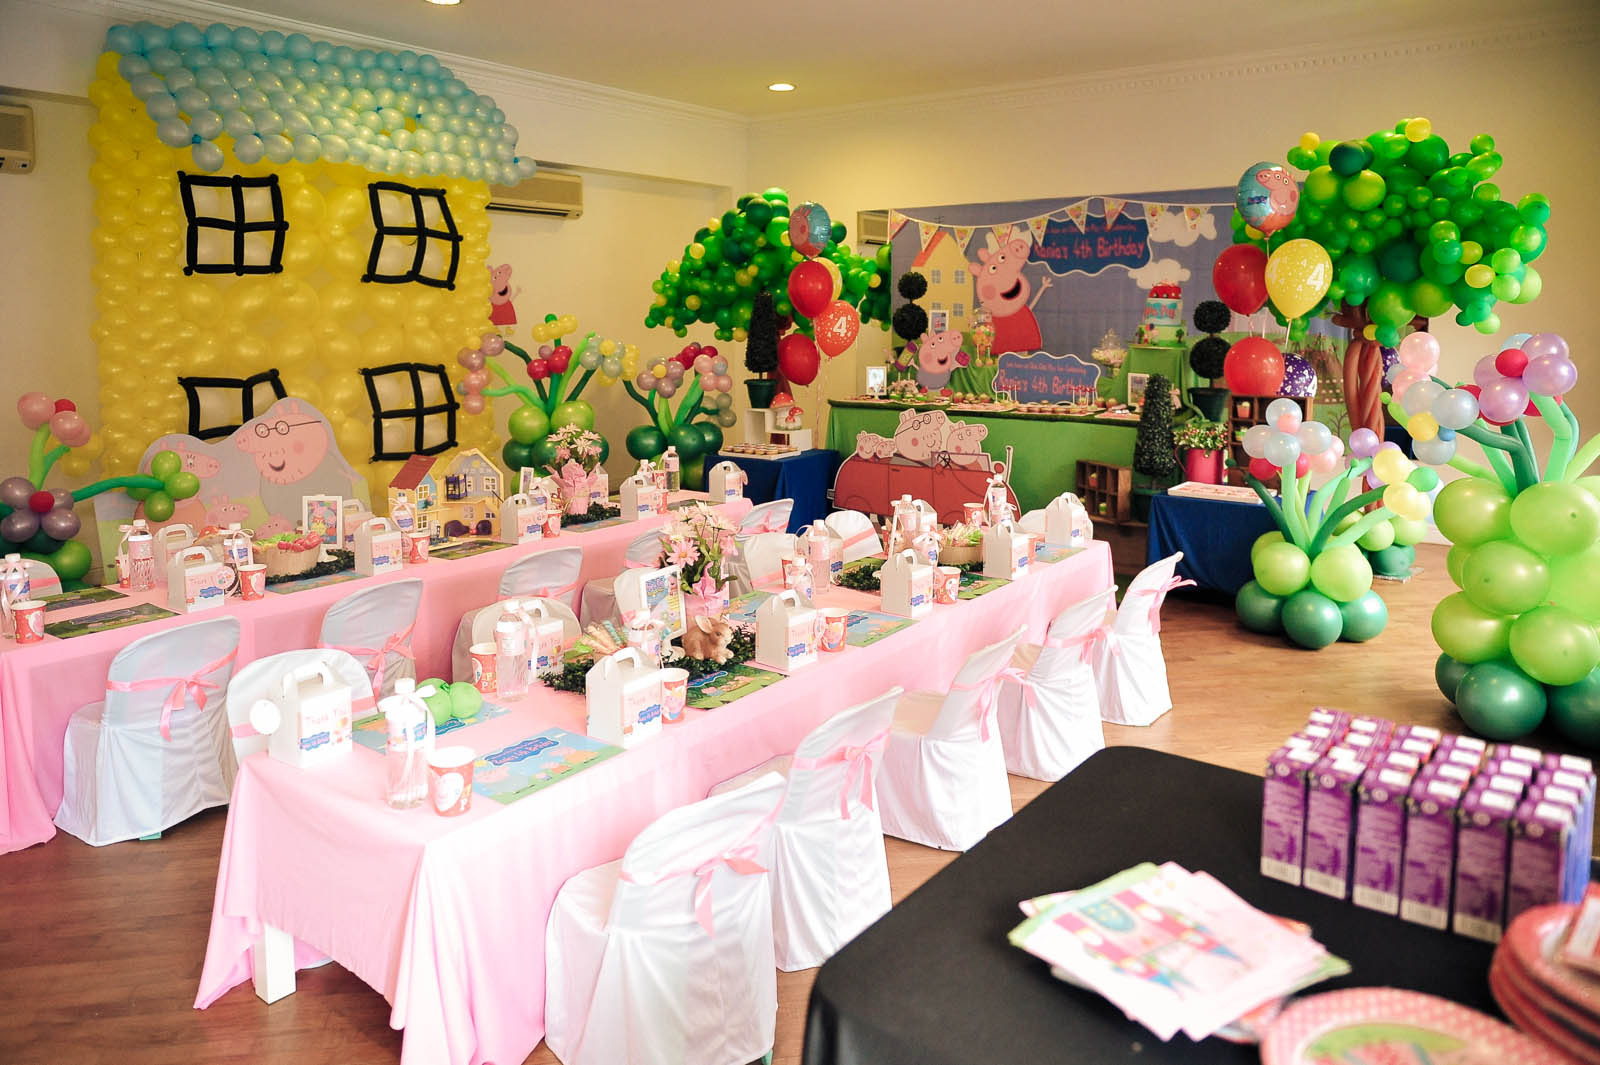 Peppa Pig Birthday Party Decorations
 Sandy Party Decorations